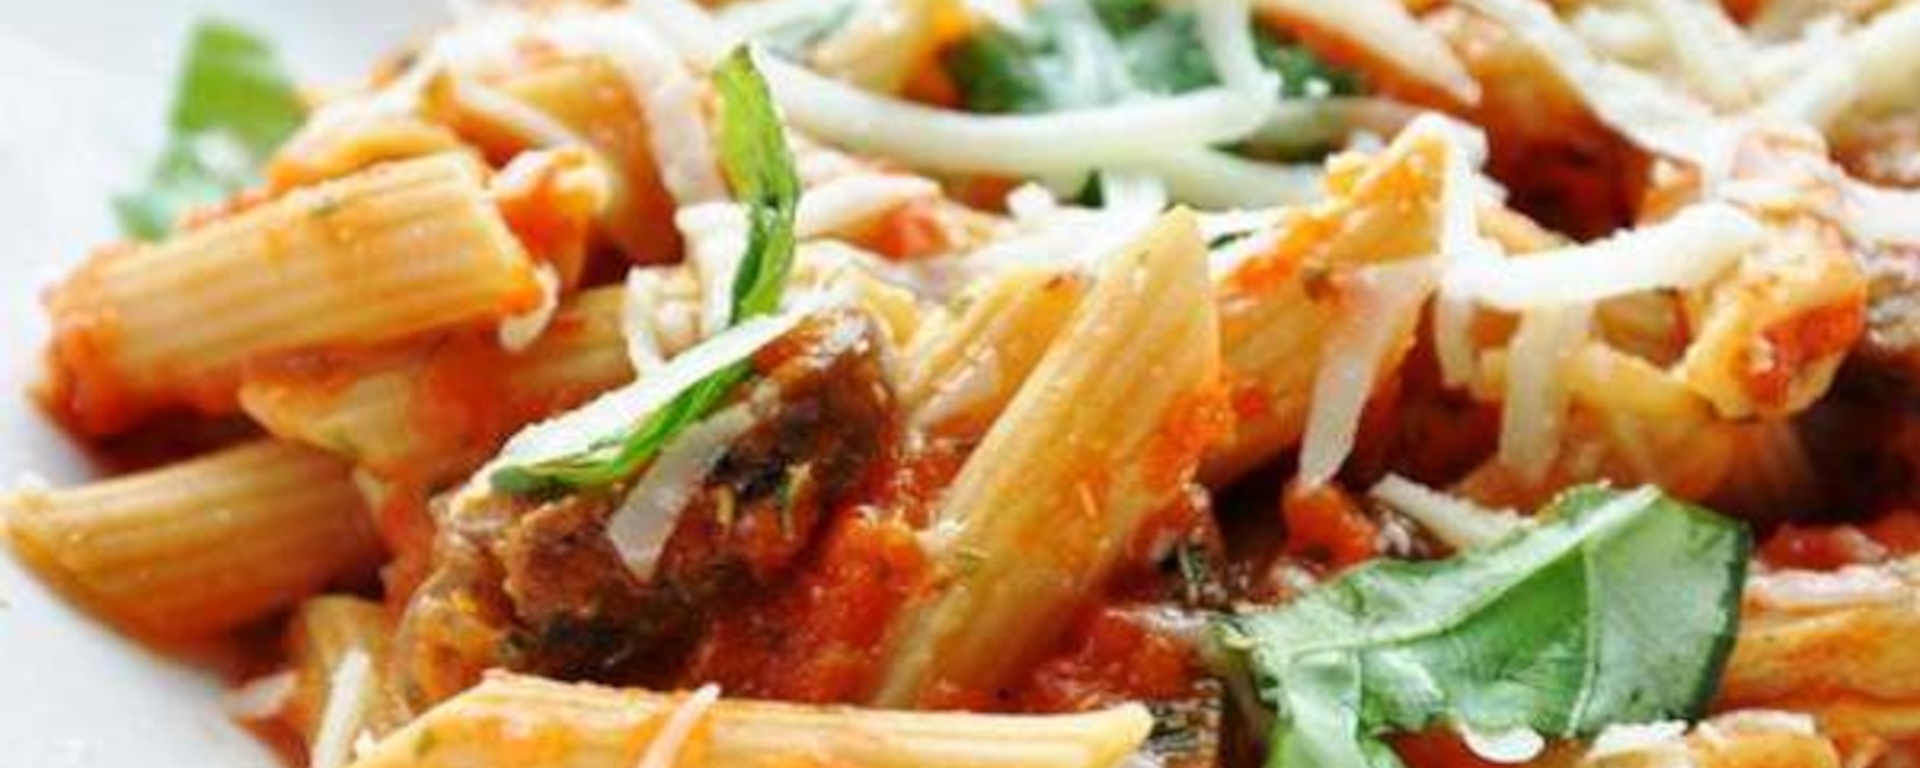 Pasta With Mushrooms, Red Bell Pepper And Pumpkin